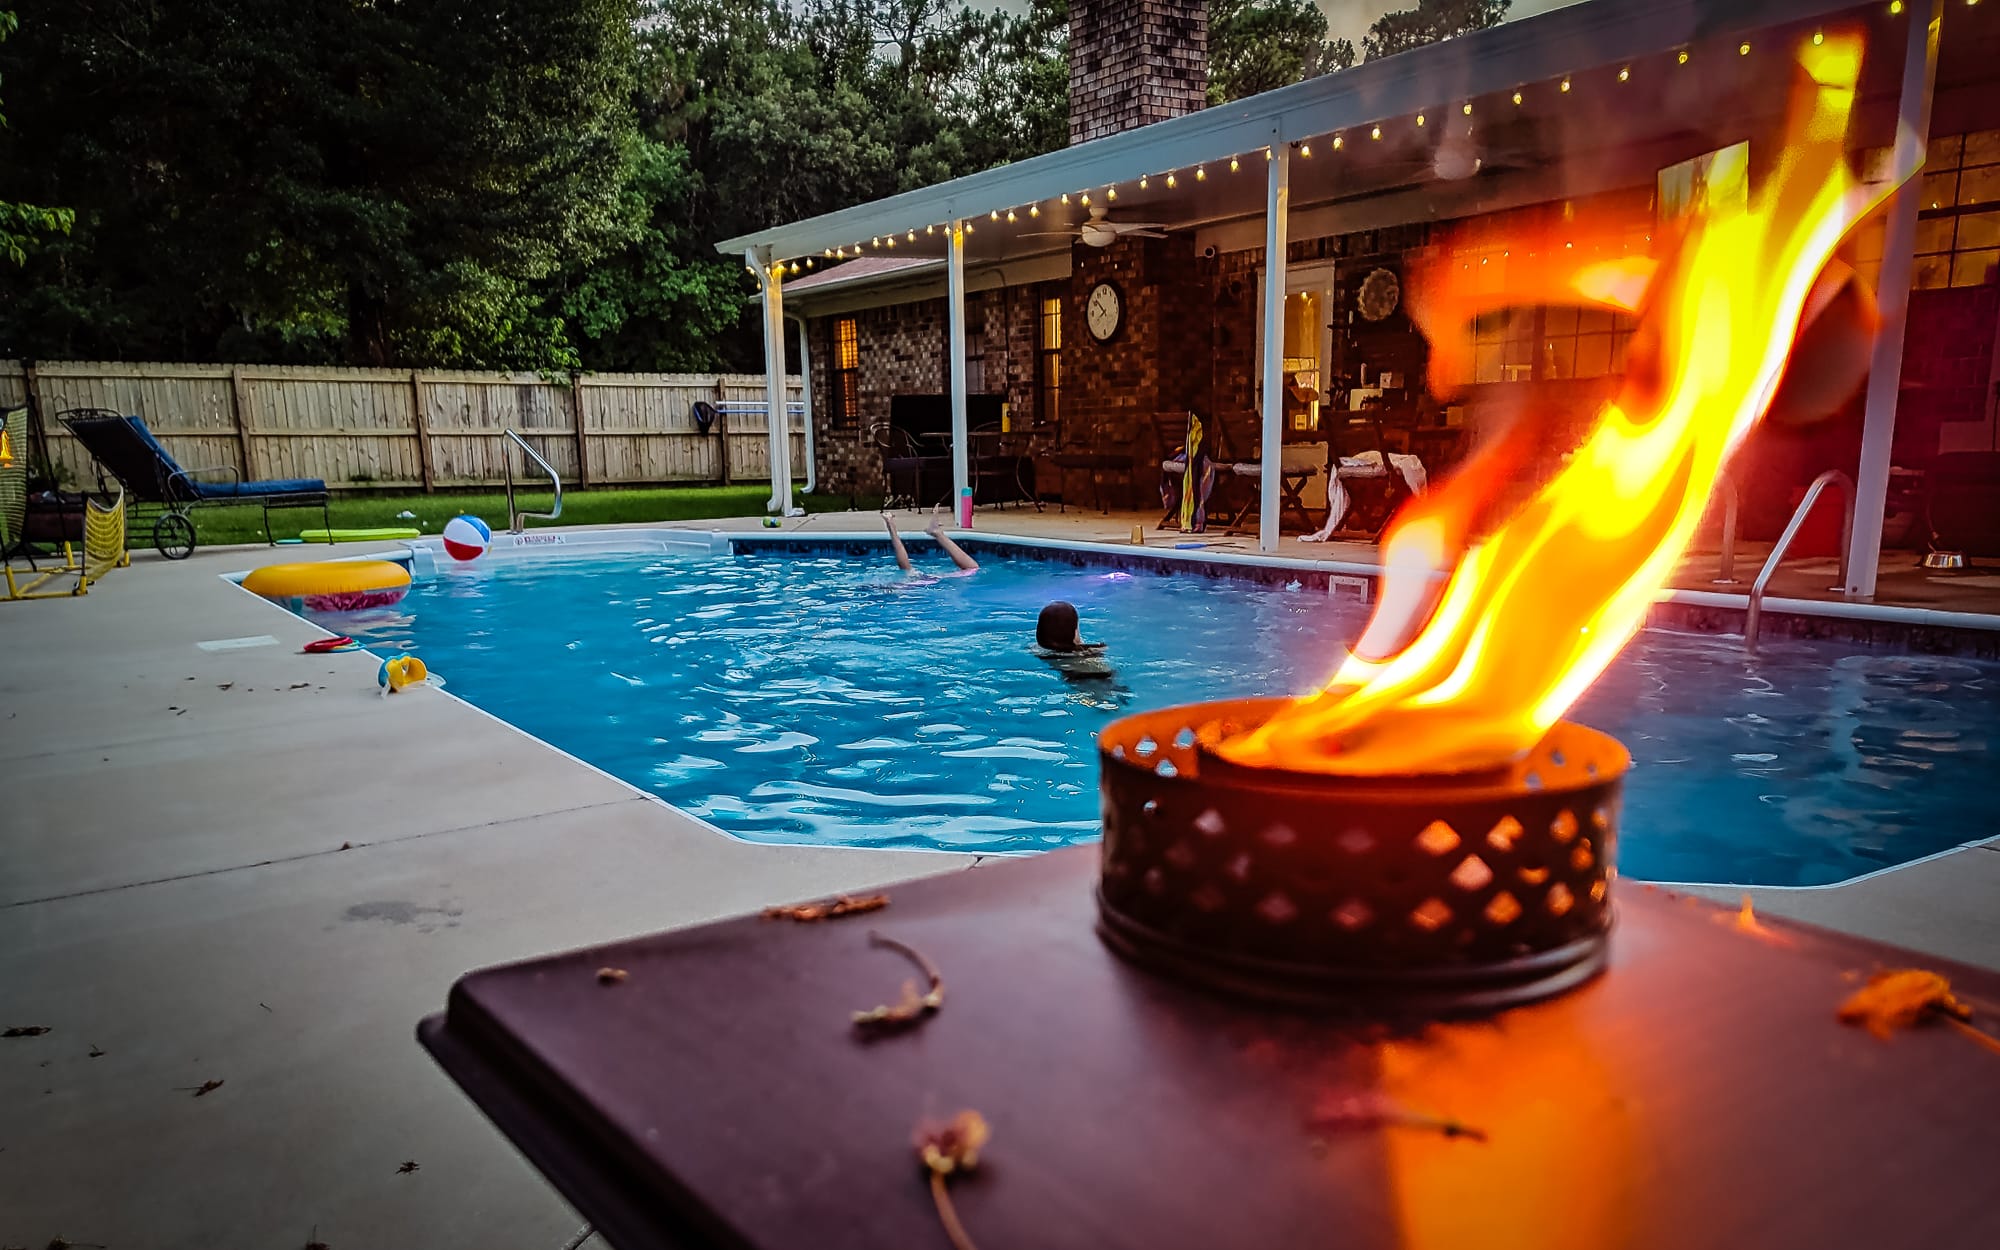 A citronella torch in the foreground as a family swims in a backyard pool.